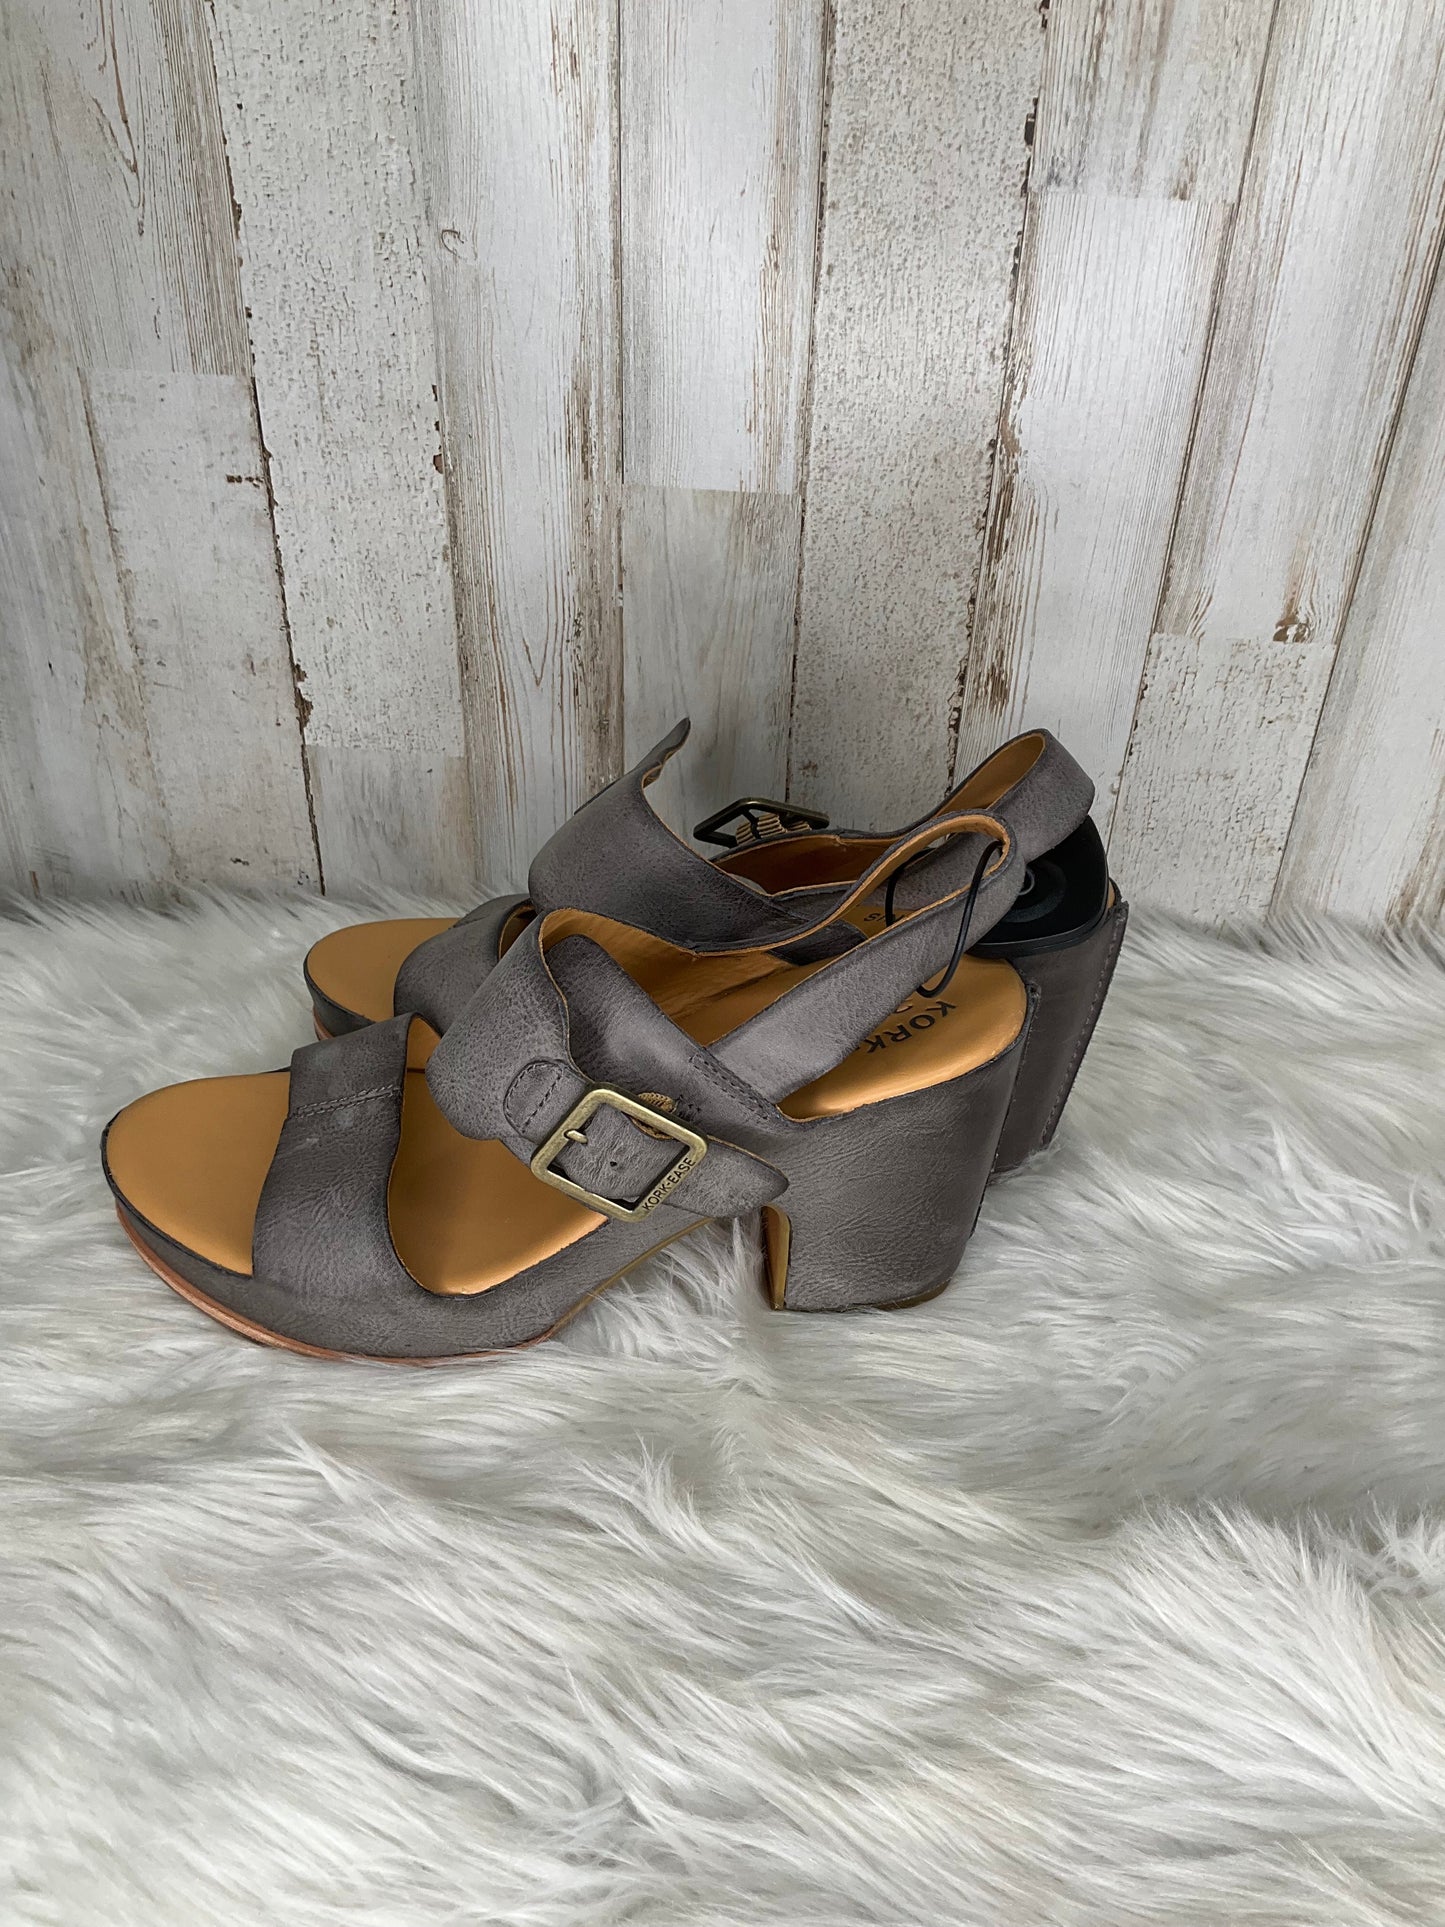 Shoes Heels Block By Kork Ease  Size: 8